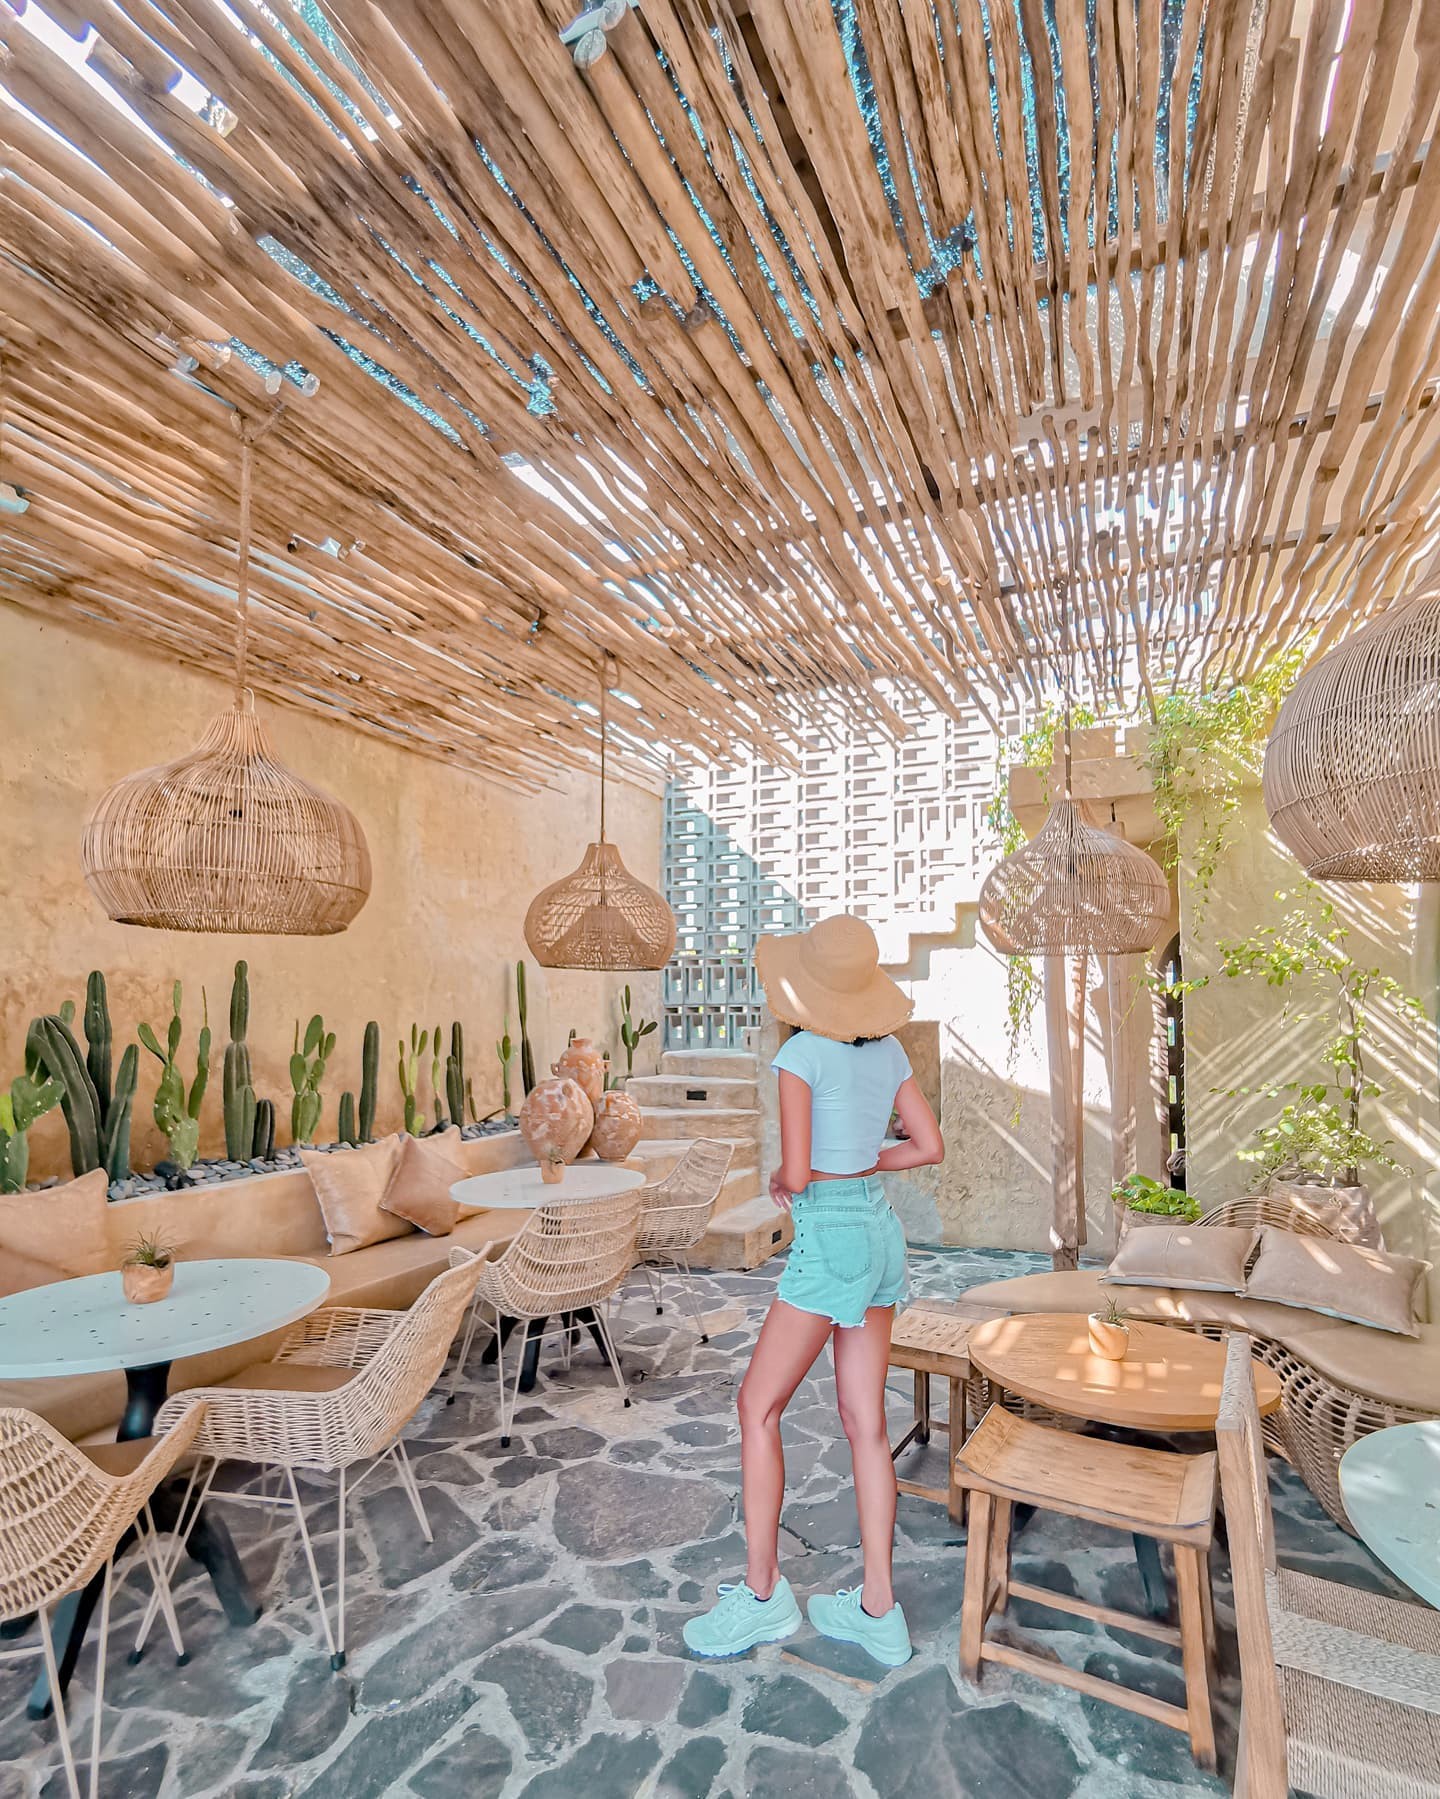 Stylish cafe patio with bamboo ceiling, hanging lamps, and cacti decor.